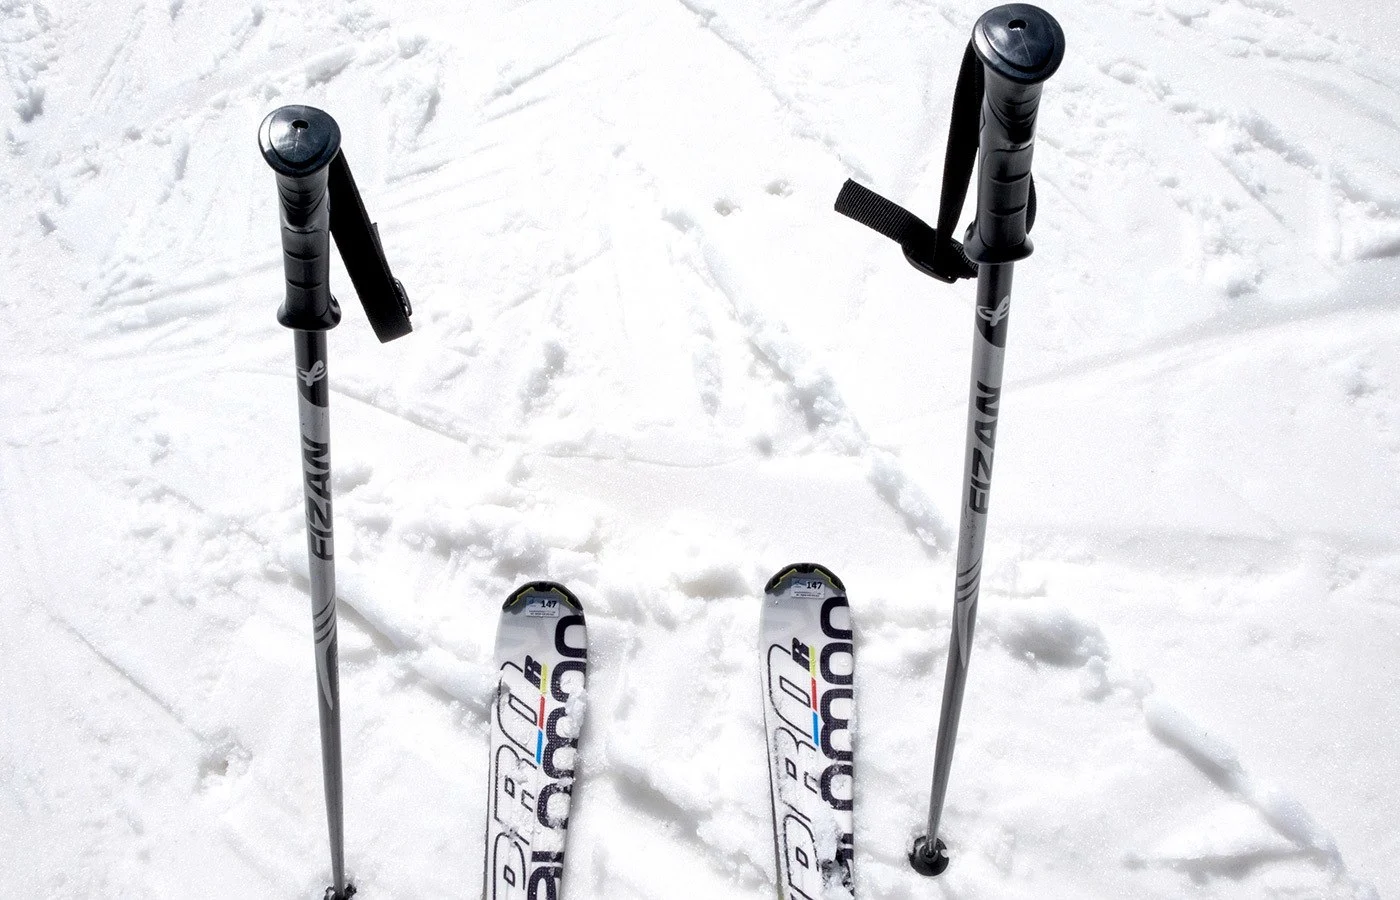 Skis and poles